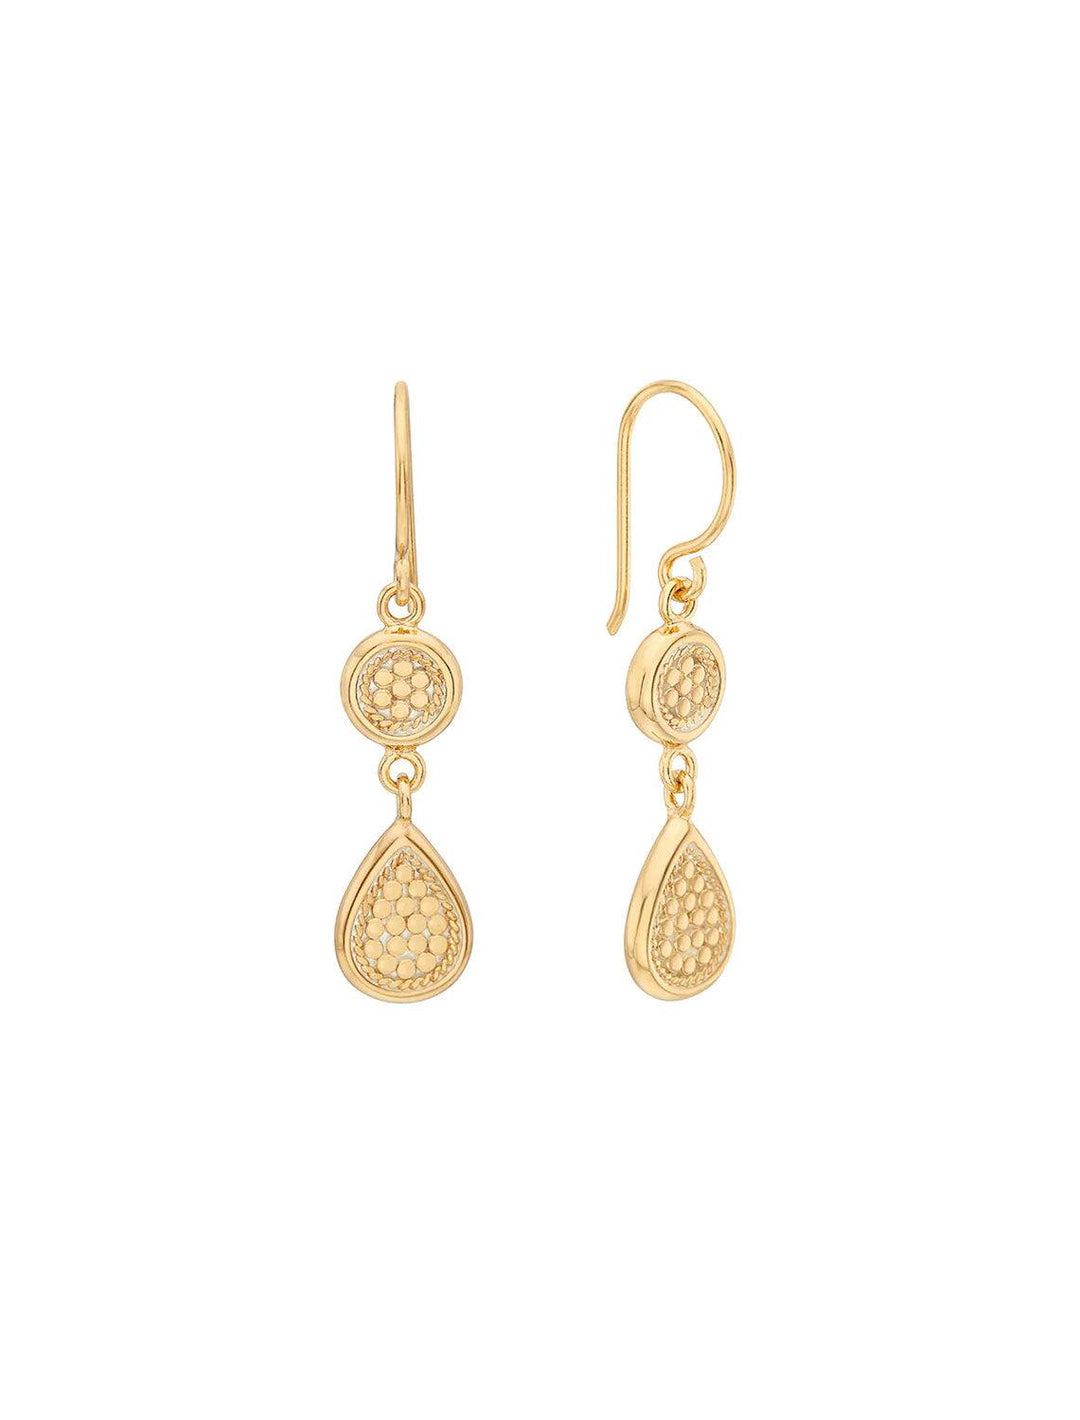 Front view of Anna Beck's classic double drop earrings in gold.